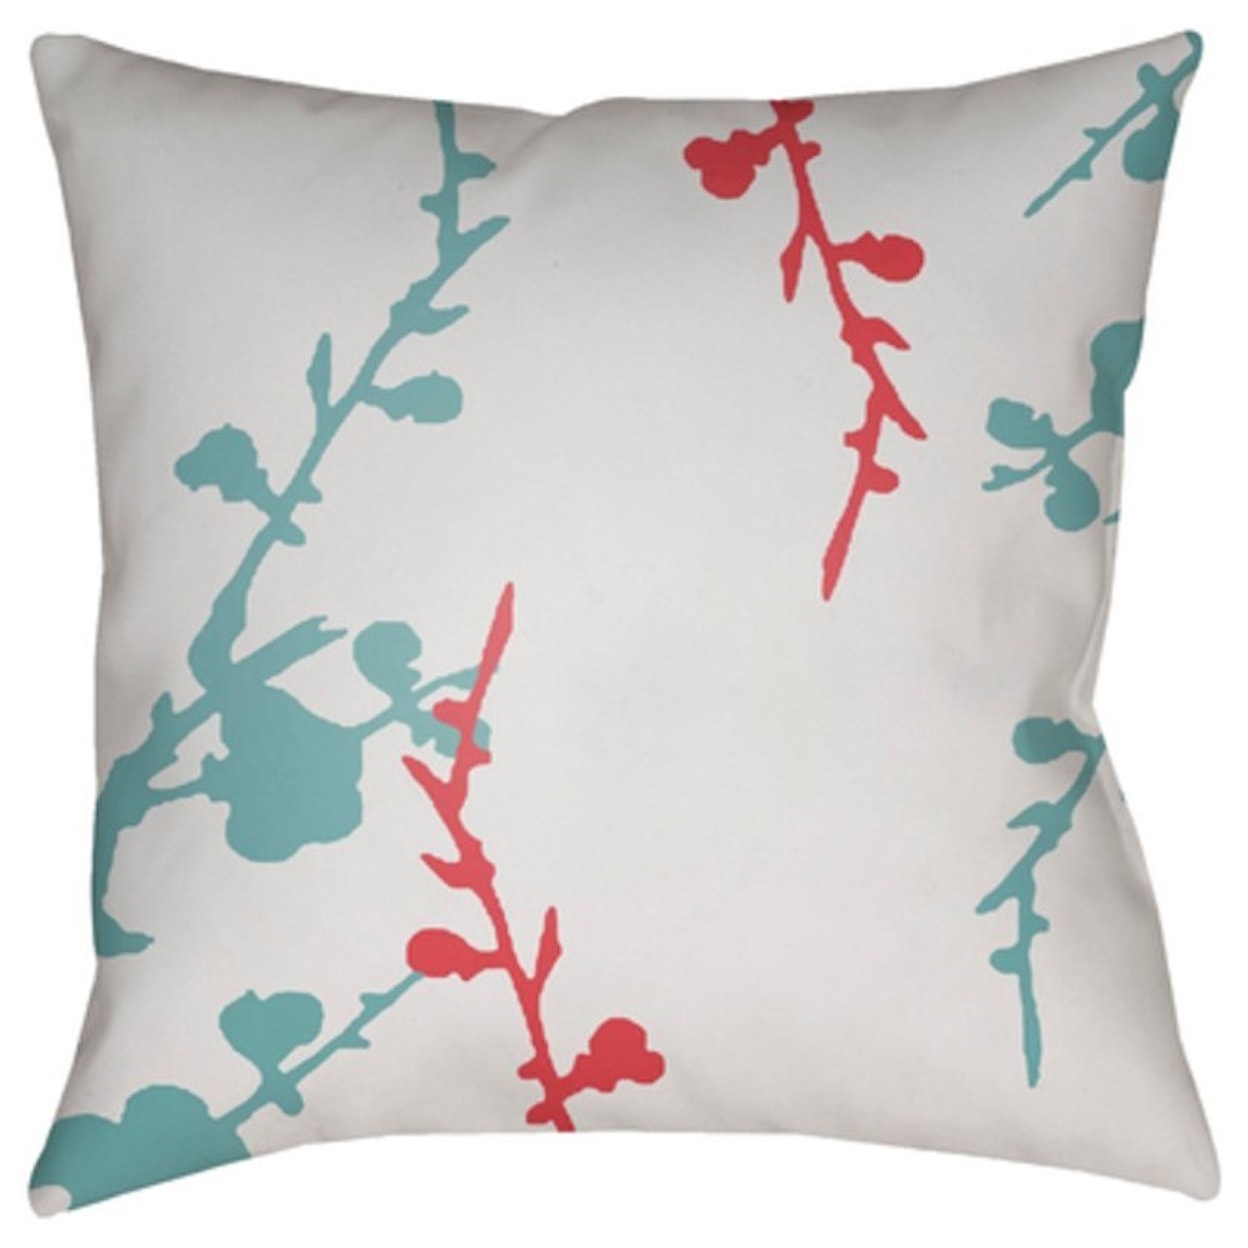 Surya Chinoiserie Floral Pillow